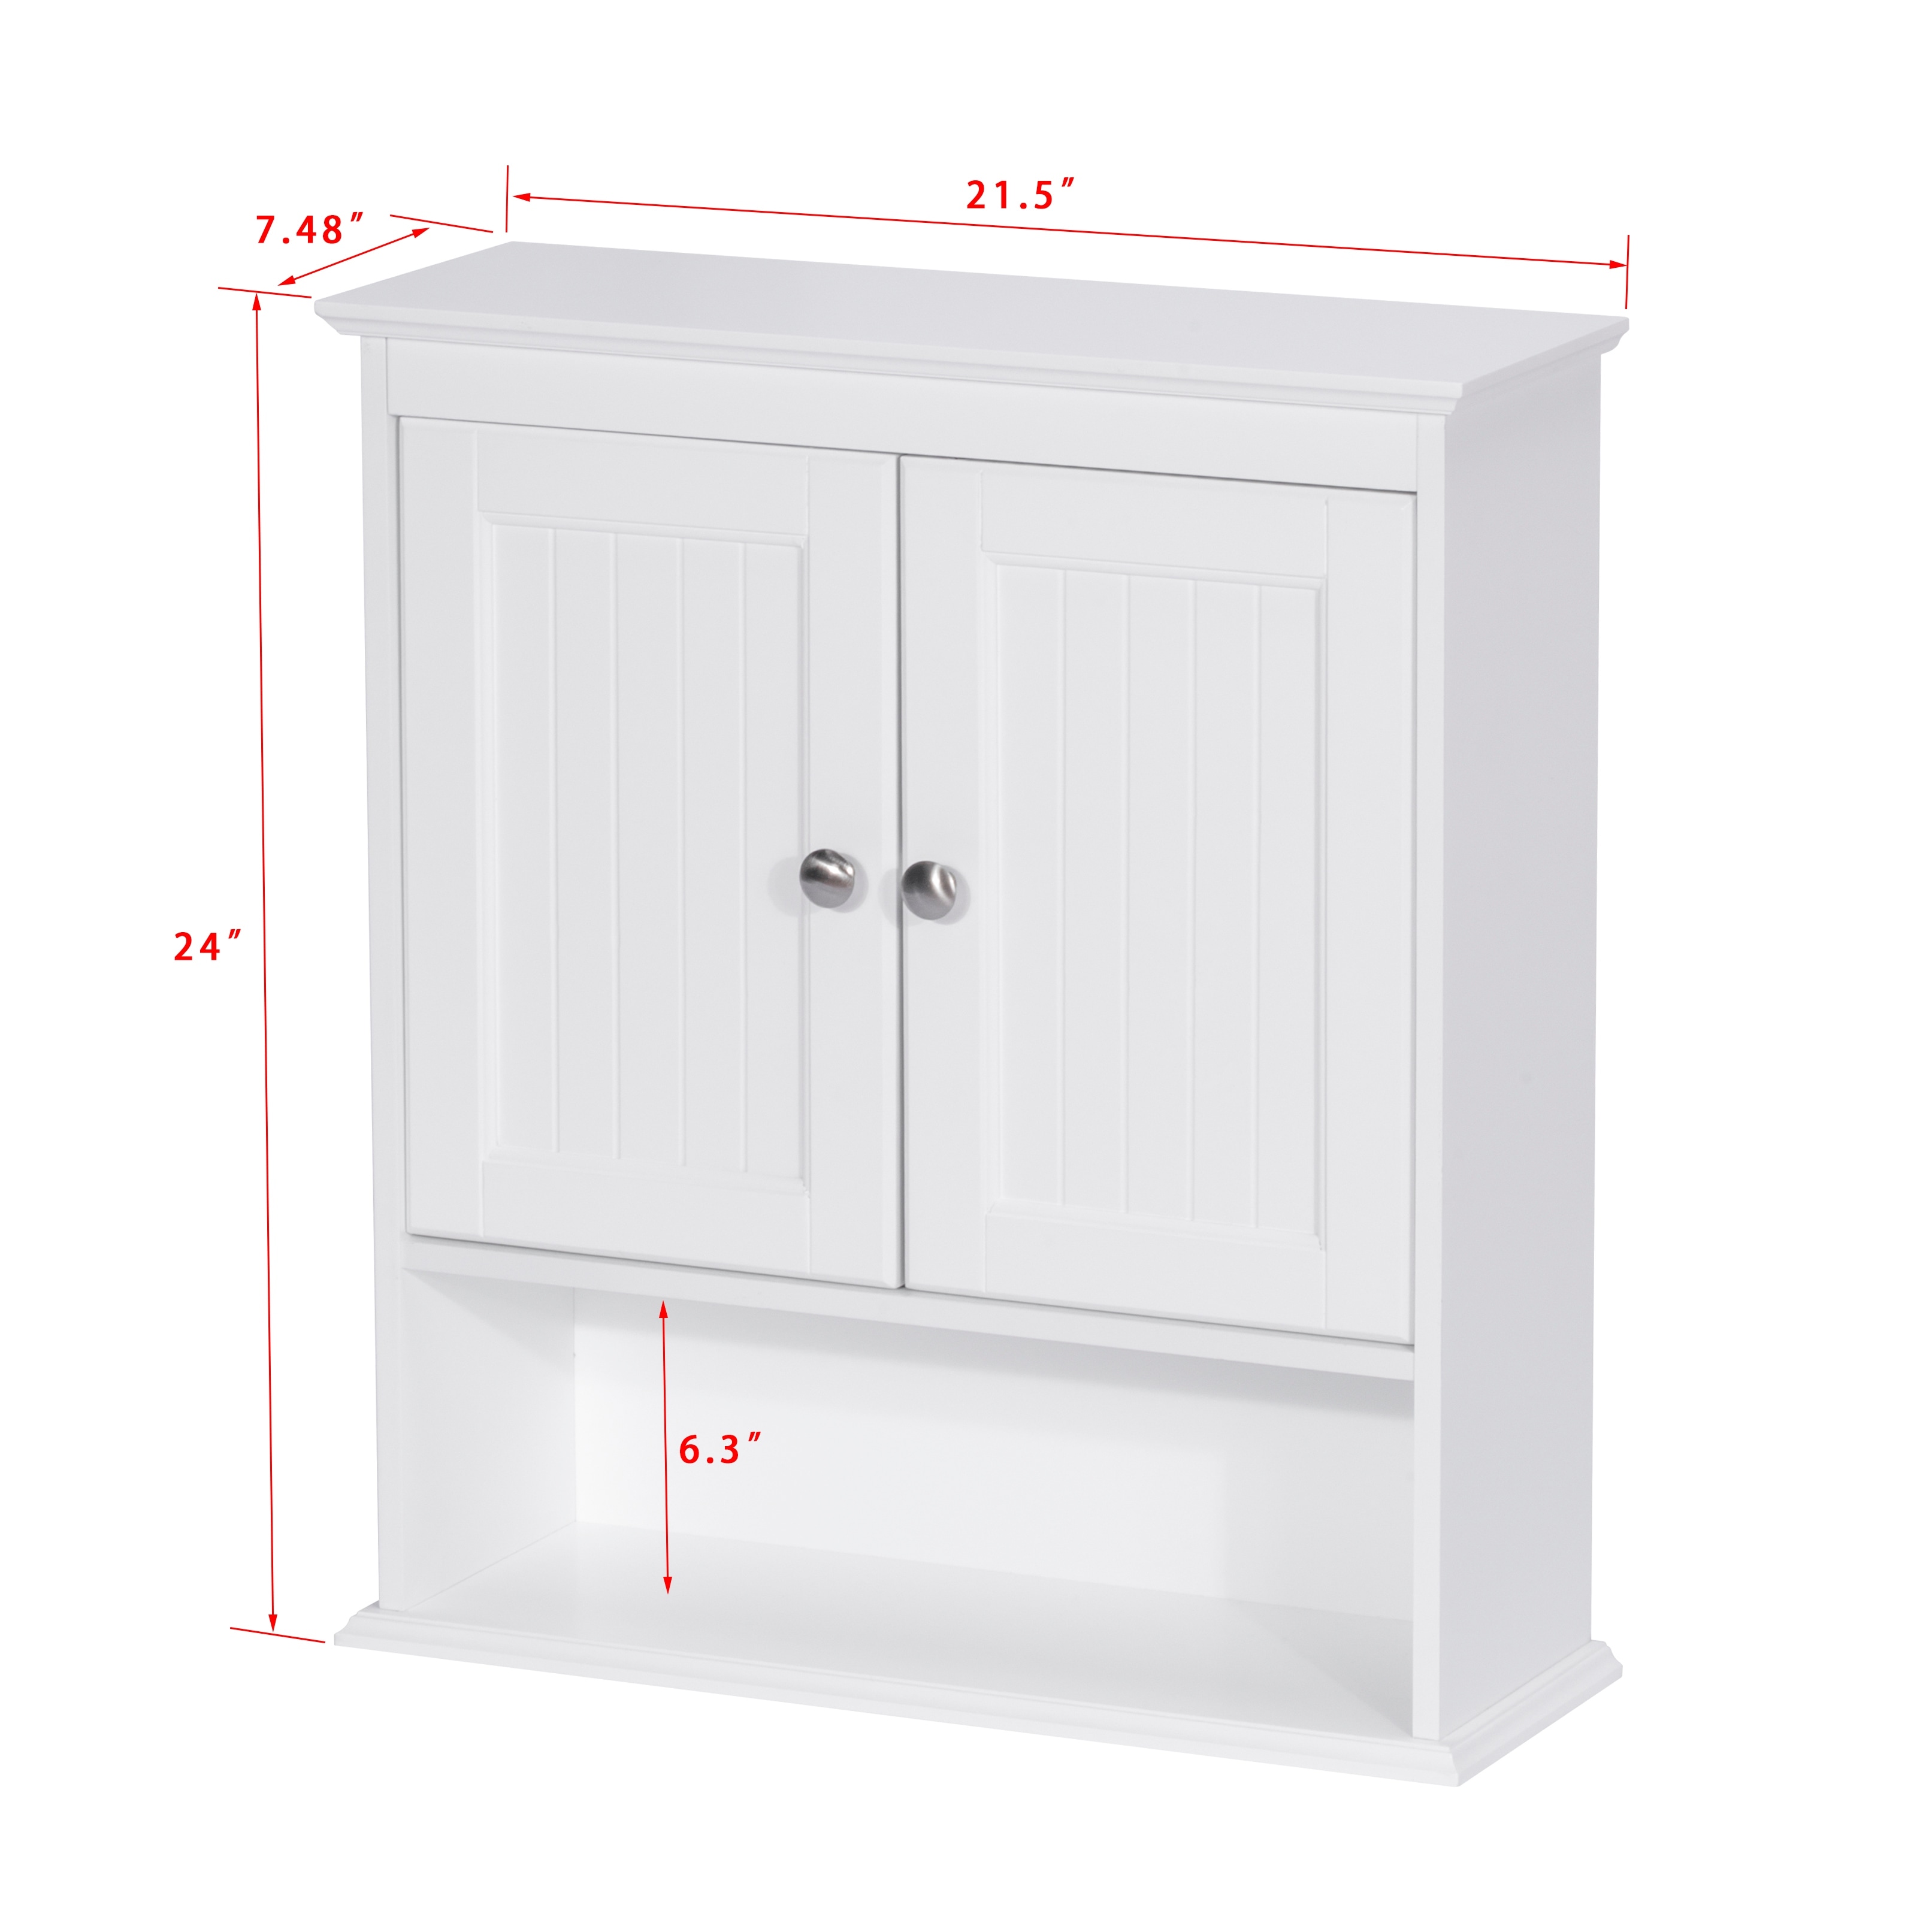 Spirich Bathroom Cabinet Wall Mounted with Doors, Wood Hanging Cabinet with  Doors and Shelves Over The Toilet, Bathroom Wall Cabinet White